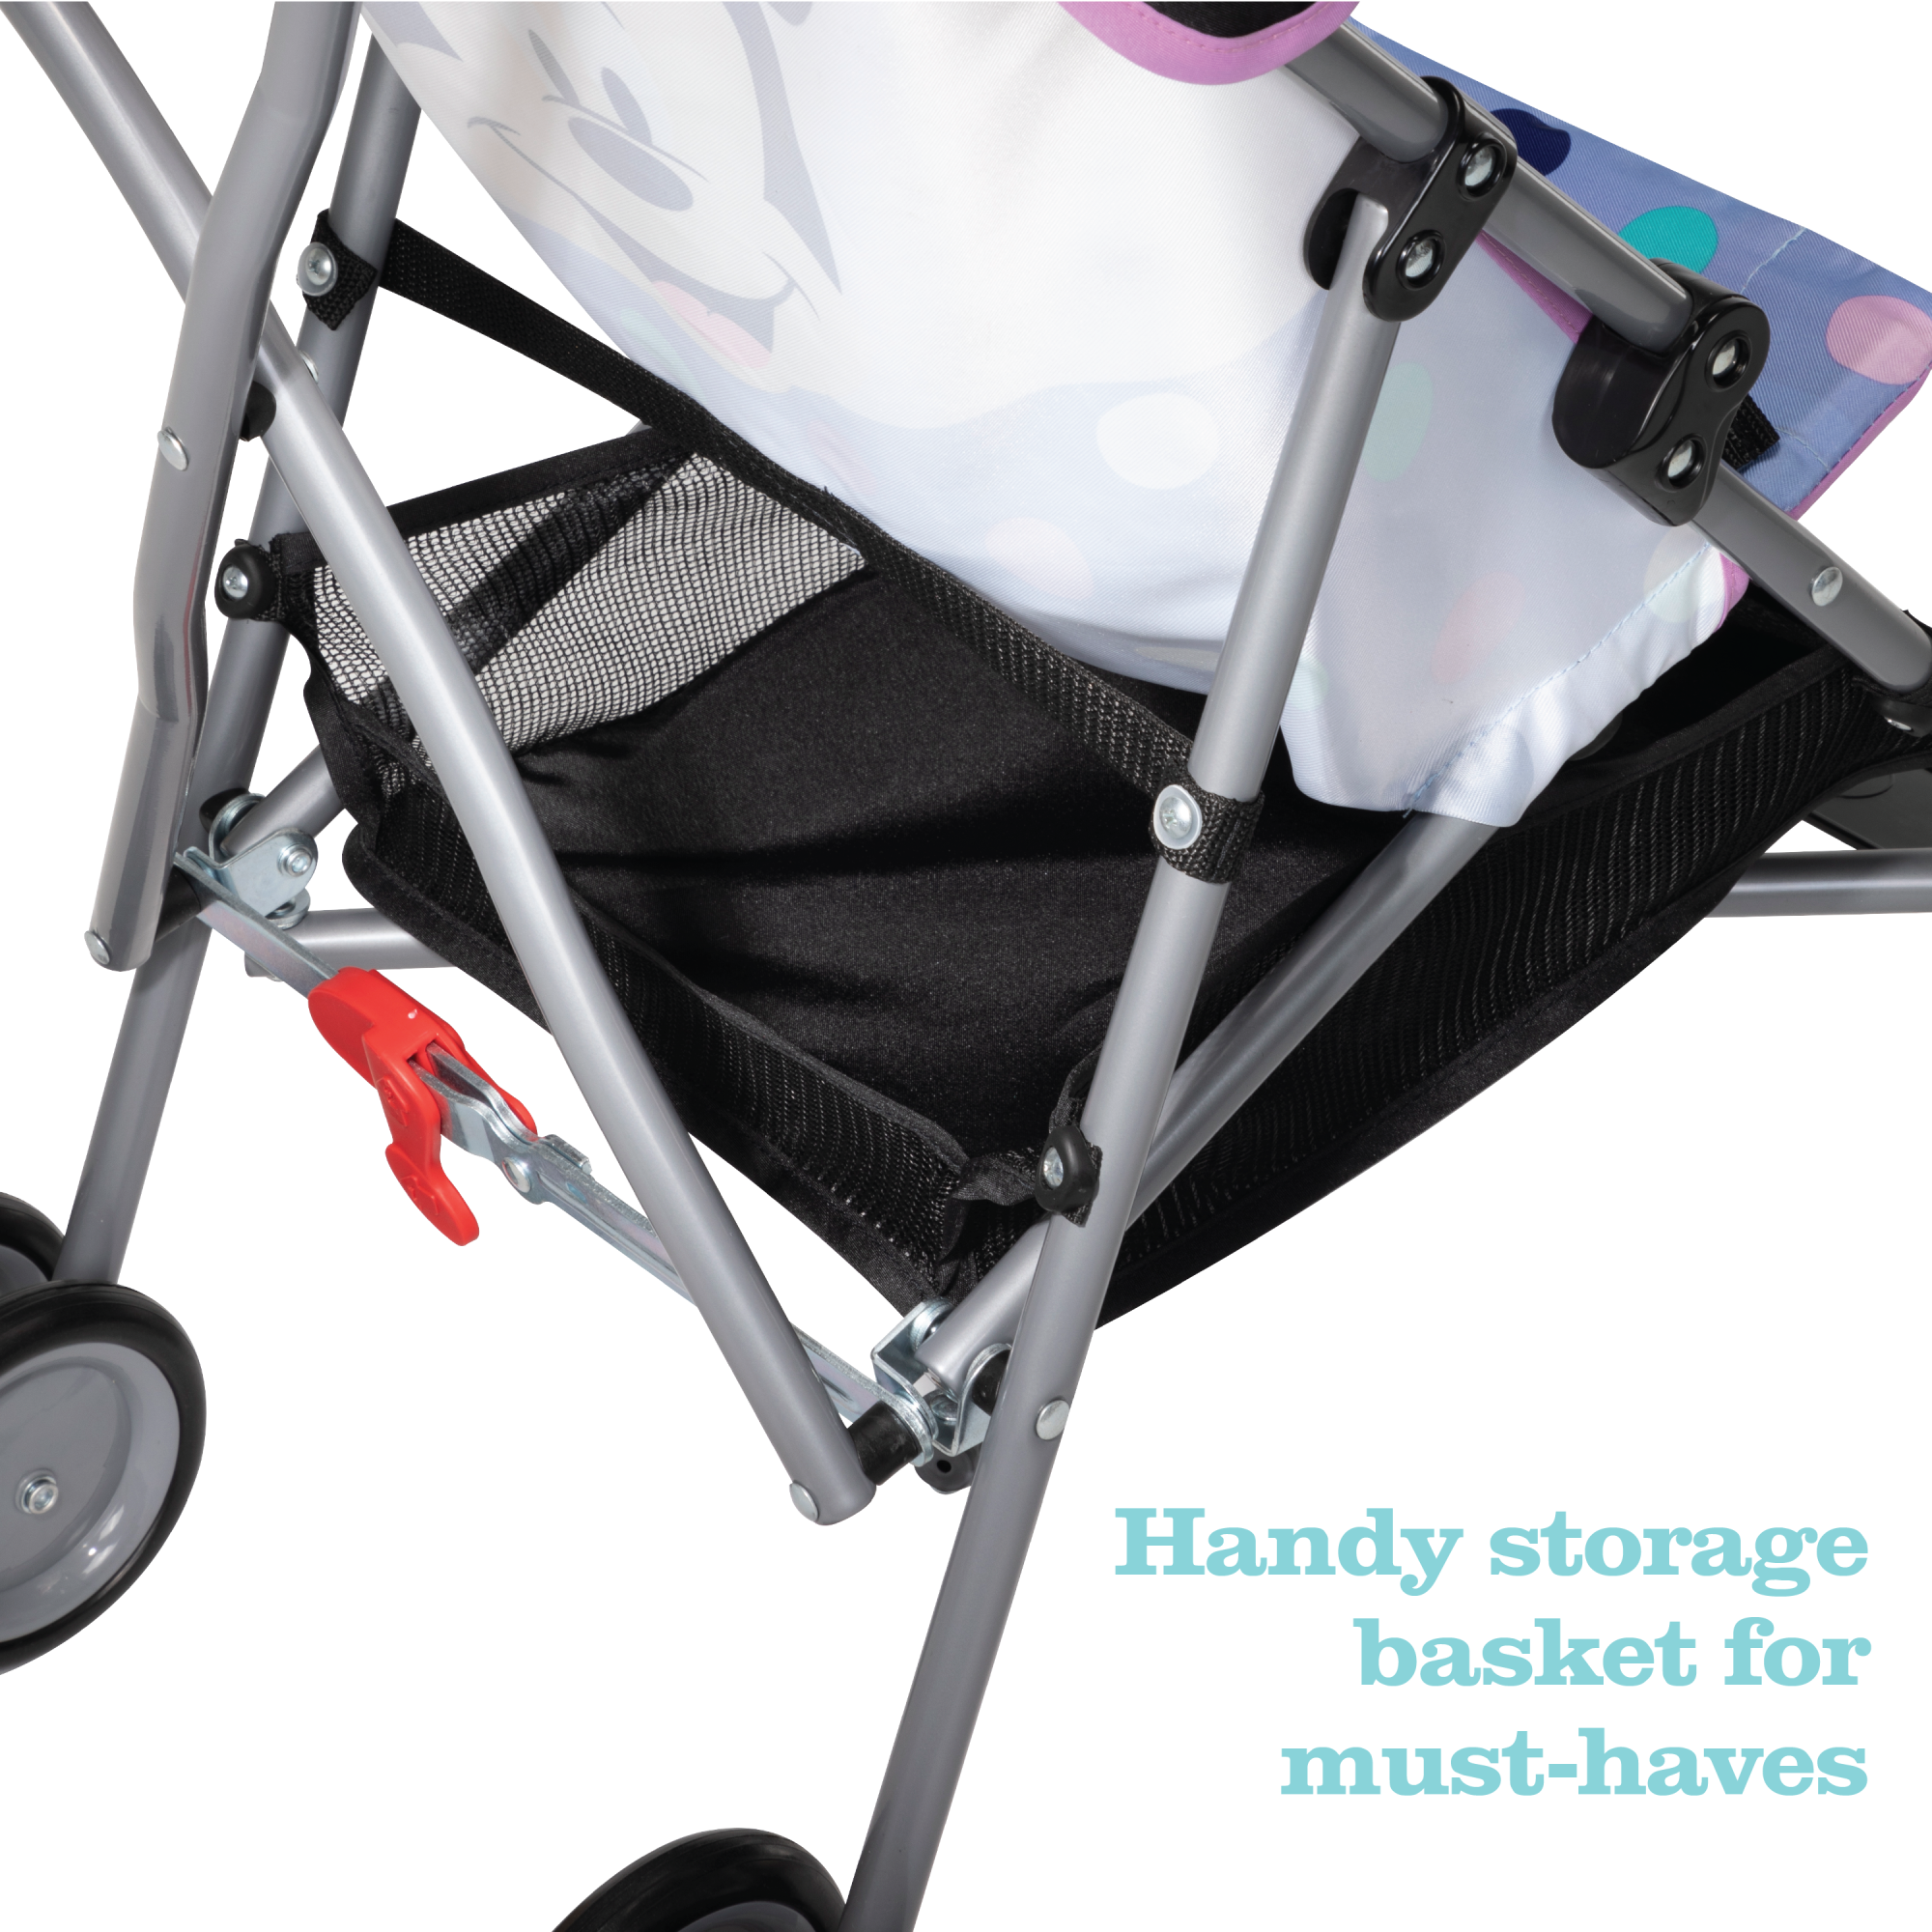 Disney Baby Character Umbrella Stroller - stows easily in small spaces